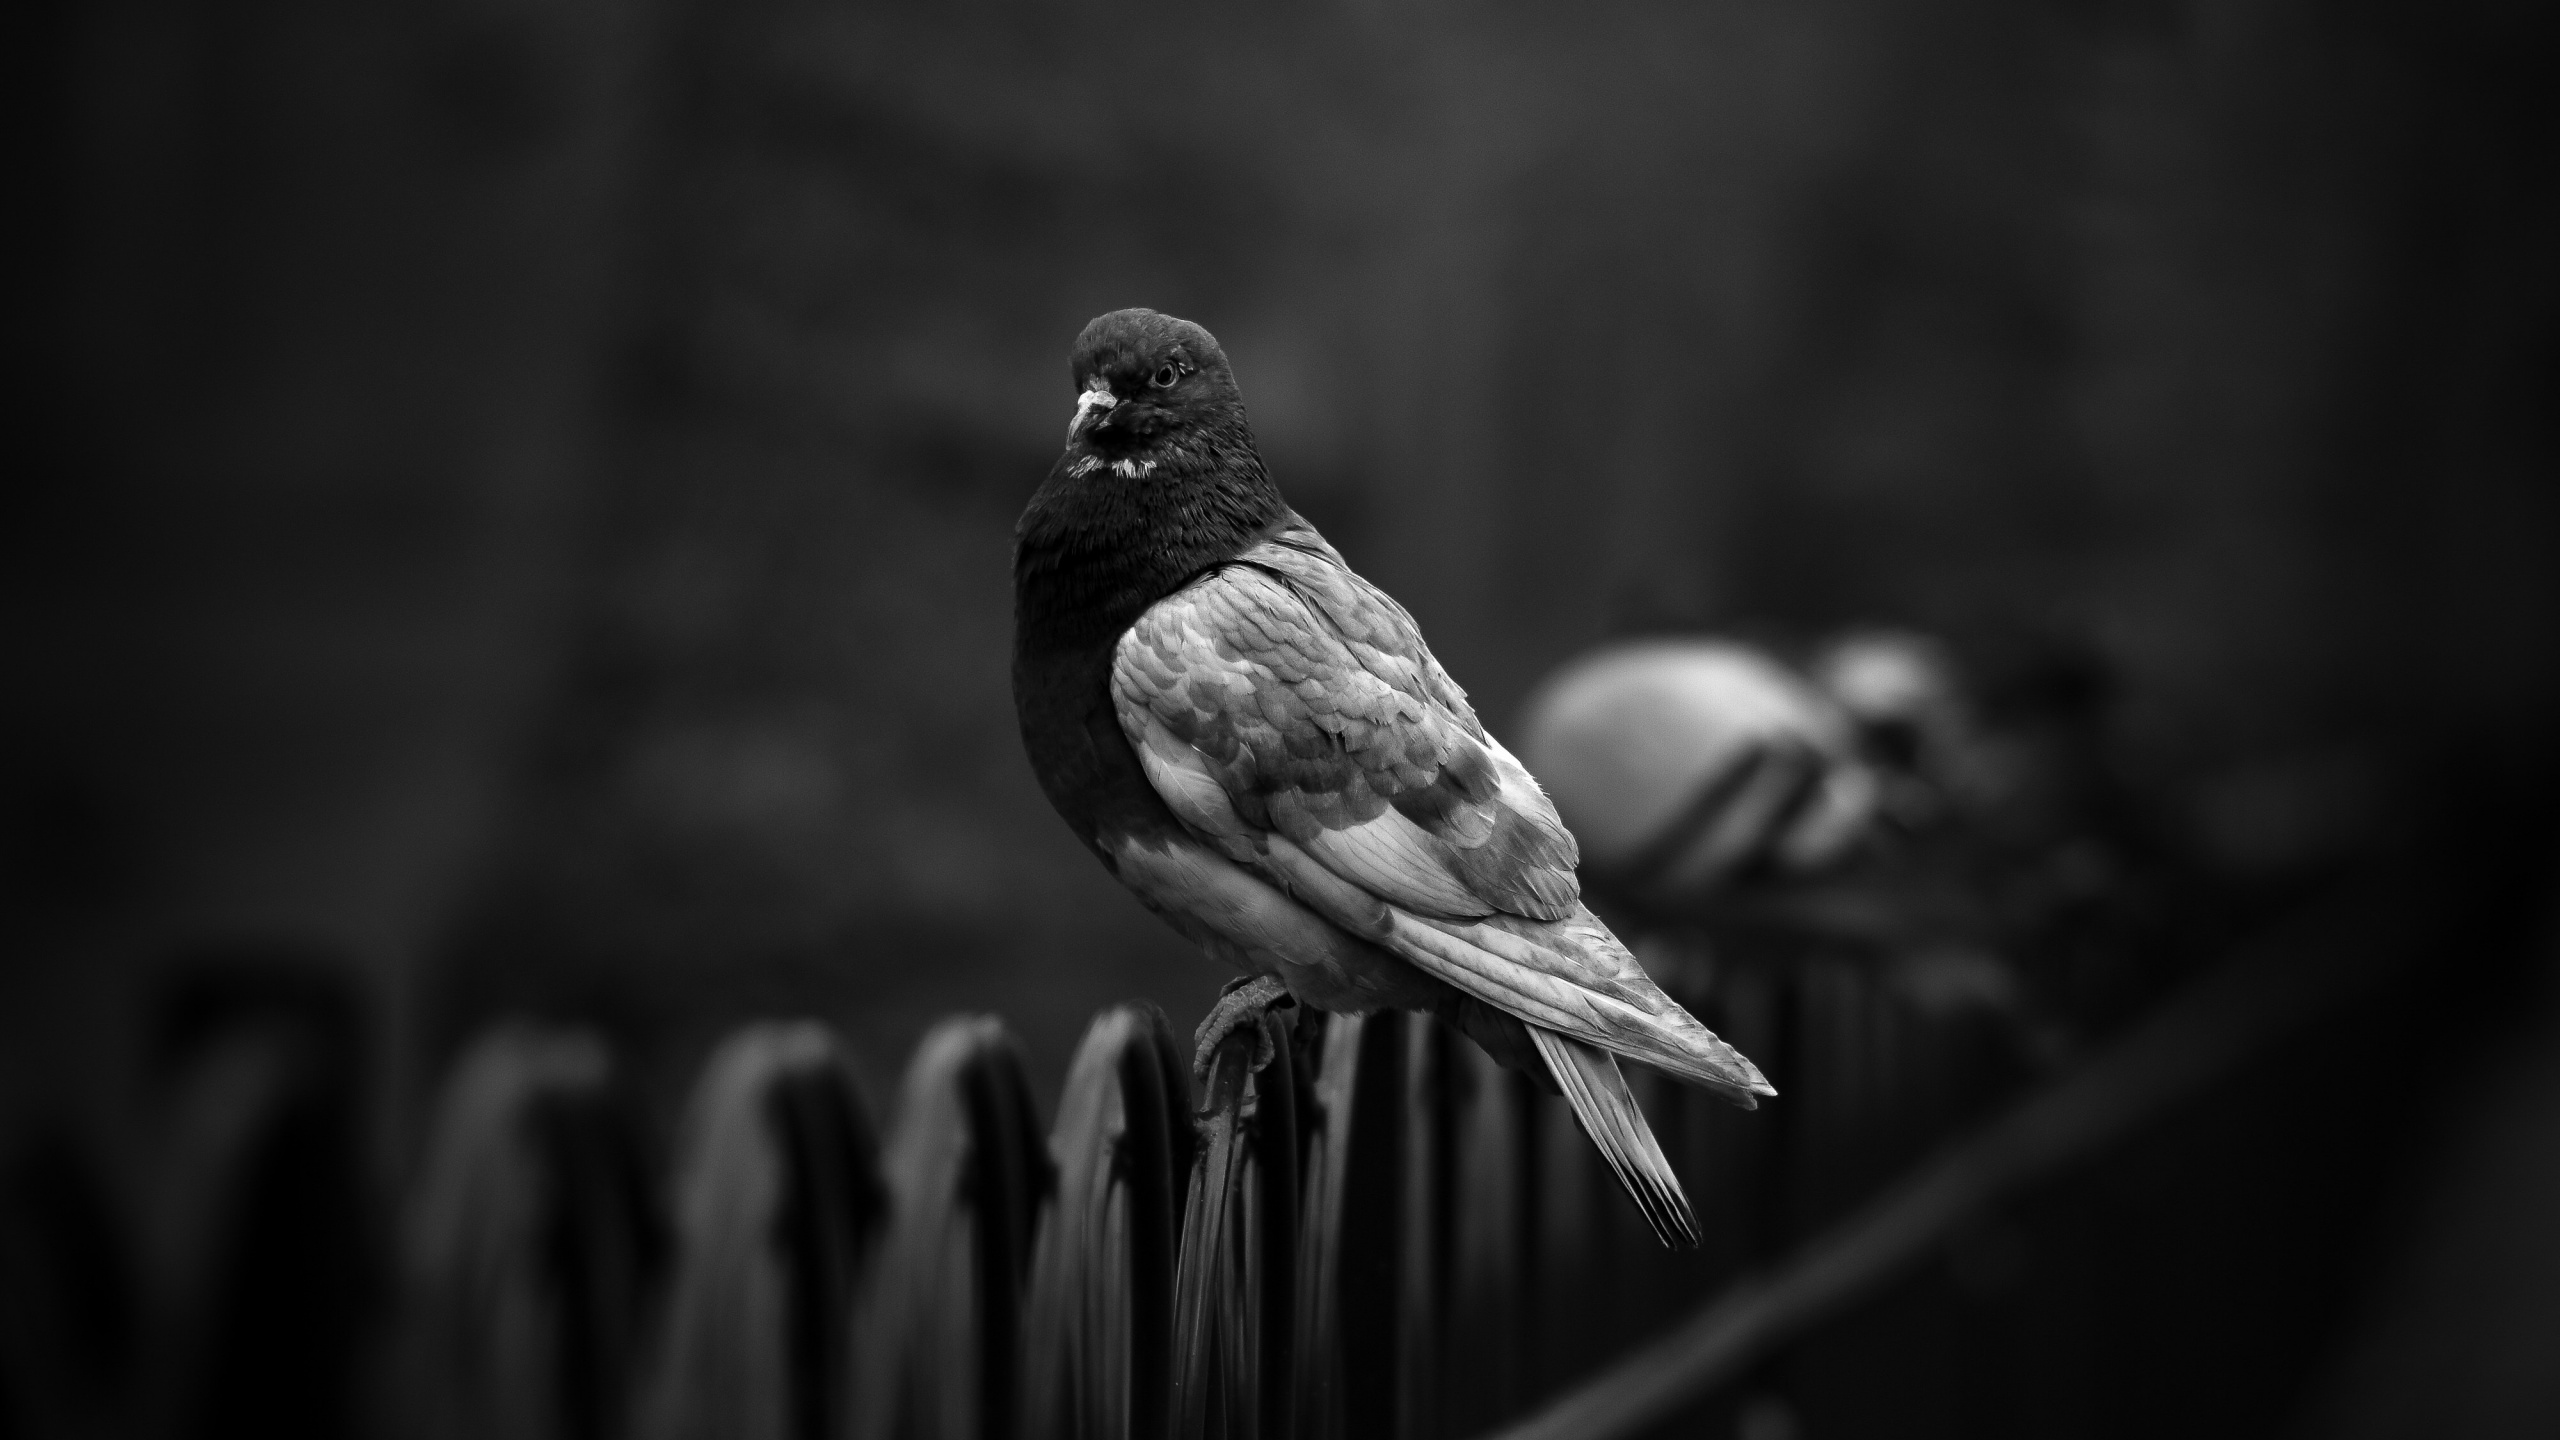 Grayscale Photo of a Bird on a Wooden Fence. Wallpaper in 2560x1440 Resolution